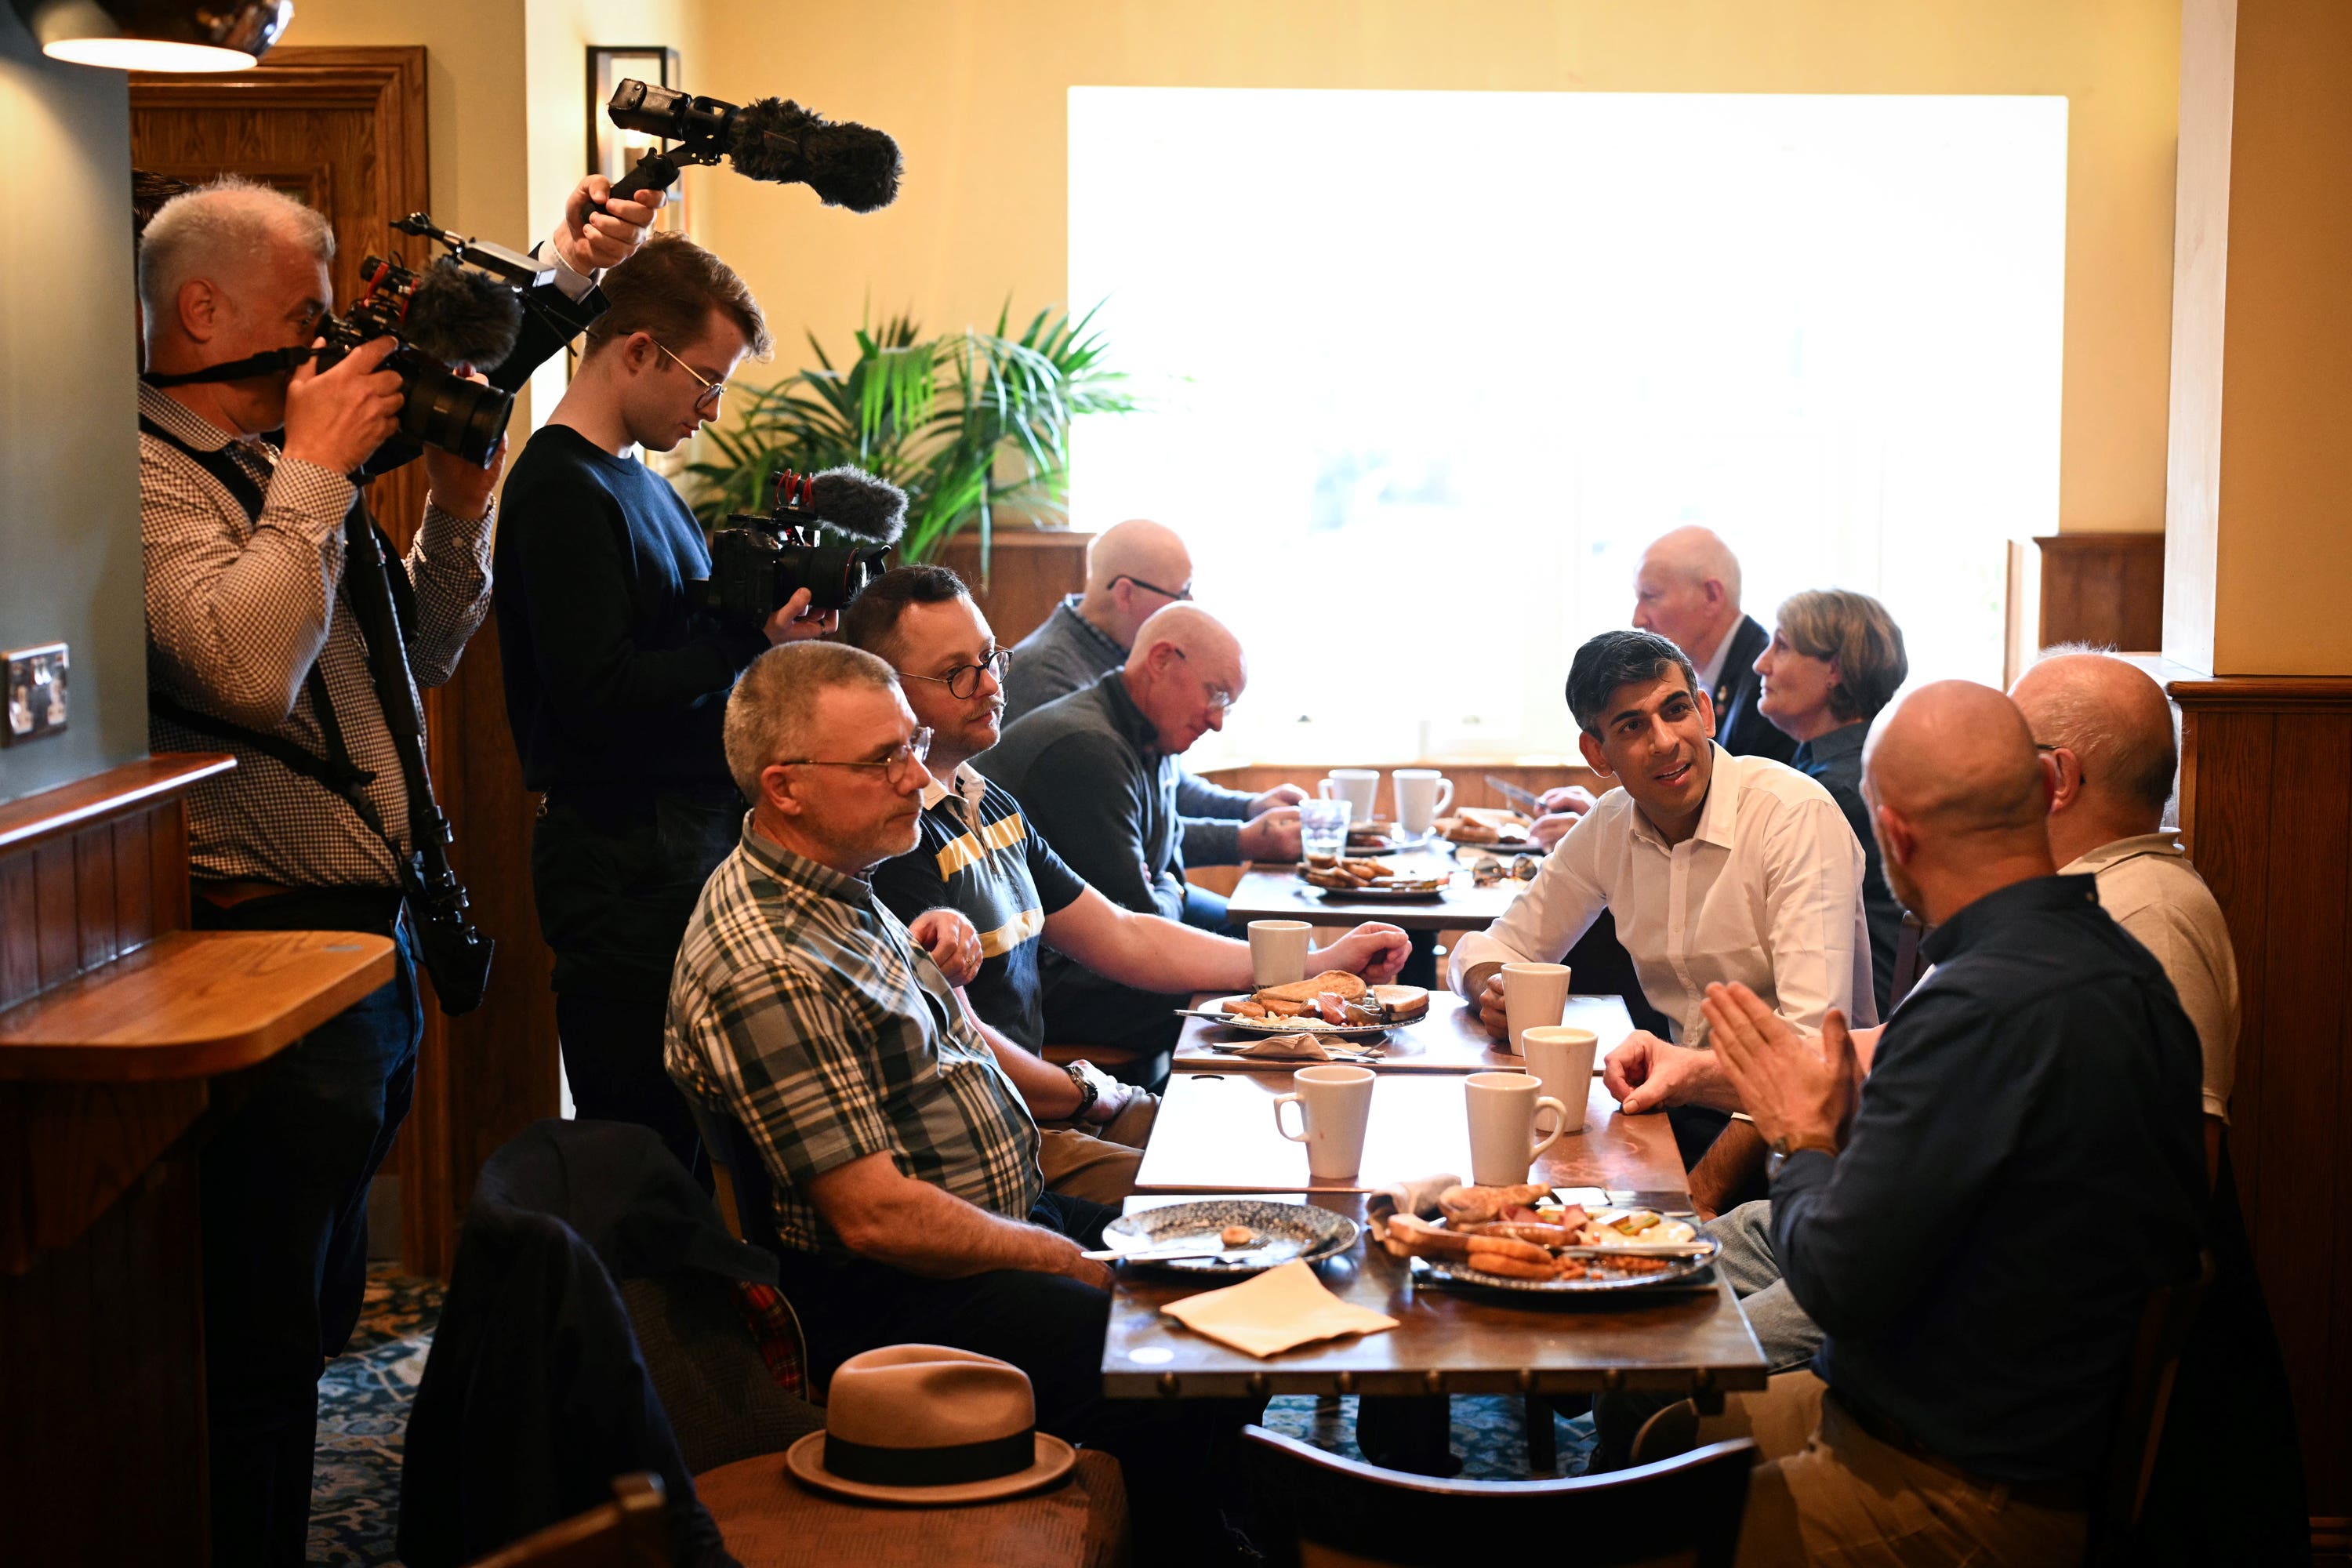 Prime Minister Rishi Sunak has held events in his own Yorkshire constituency of Richmond & Northallerton during the election campaign, including meeting veterans at a community breakfast (Oli Scarff/PA)